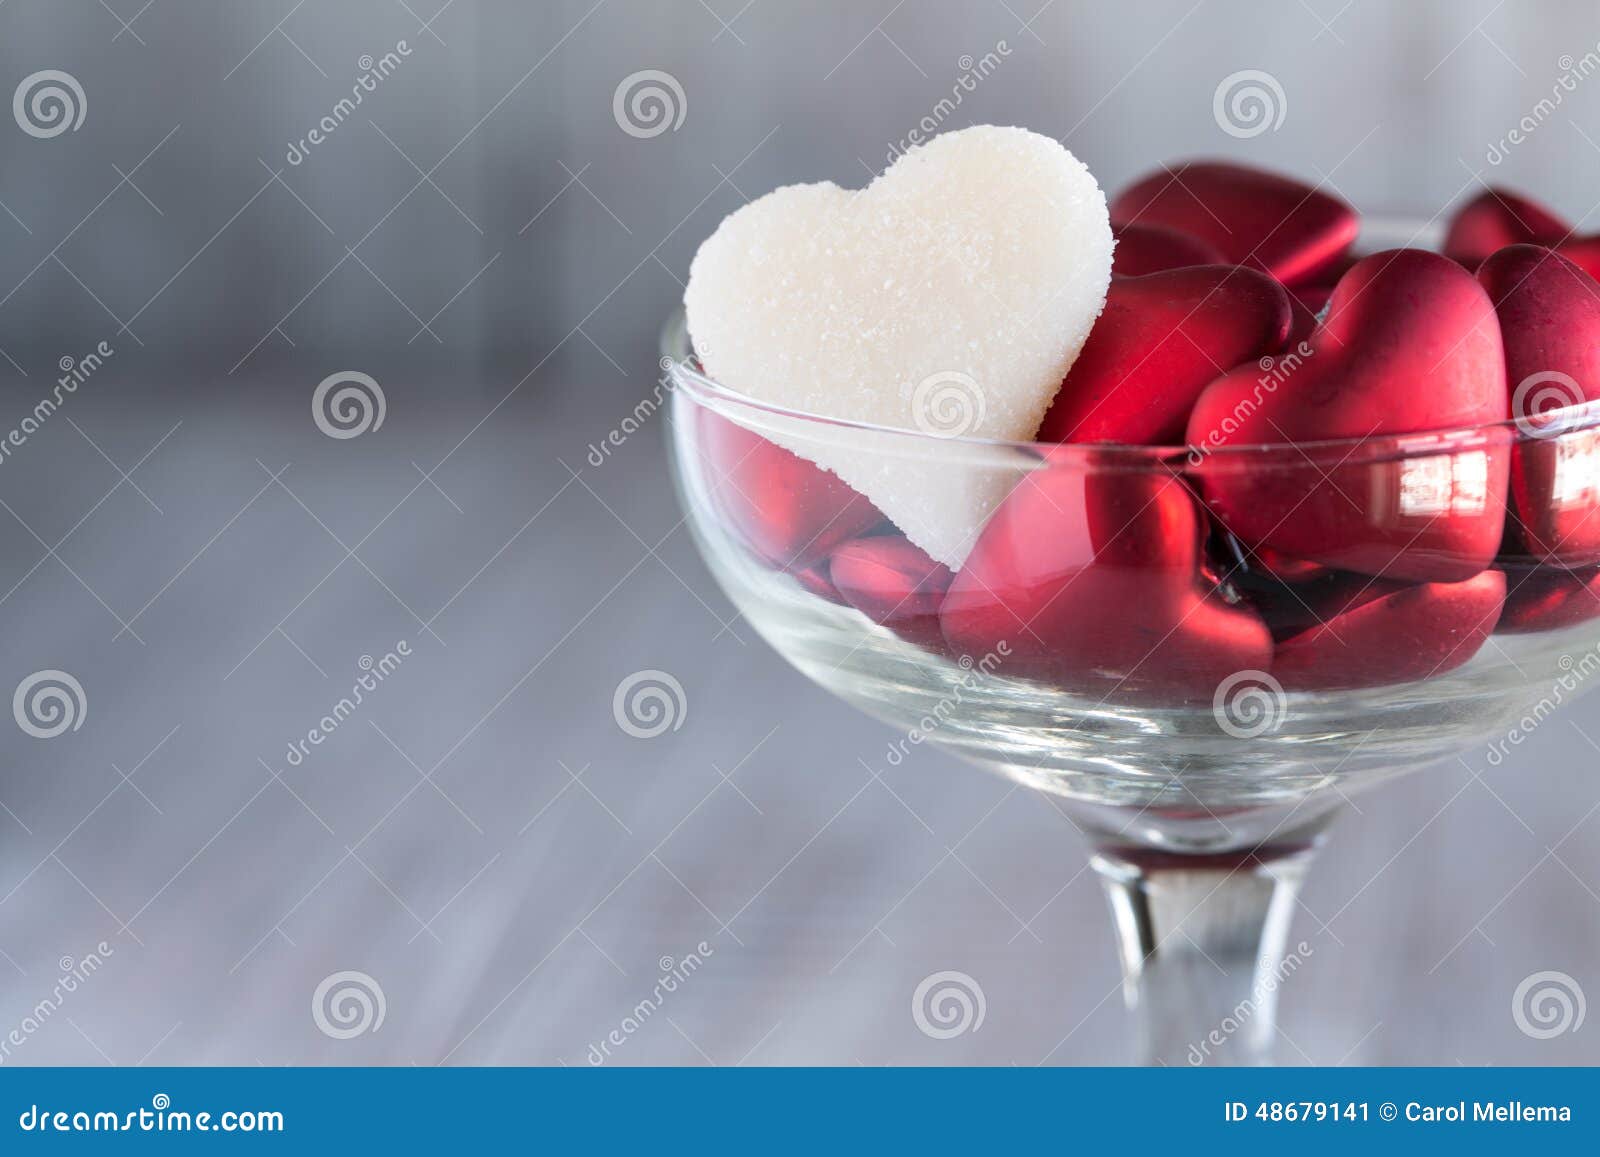 Valentines Day Candy Hearts In Wine Glass Love Symbols Stock Photo - Image: 48679141